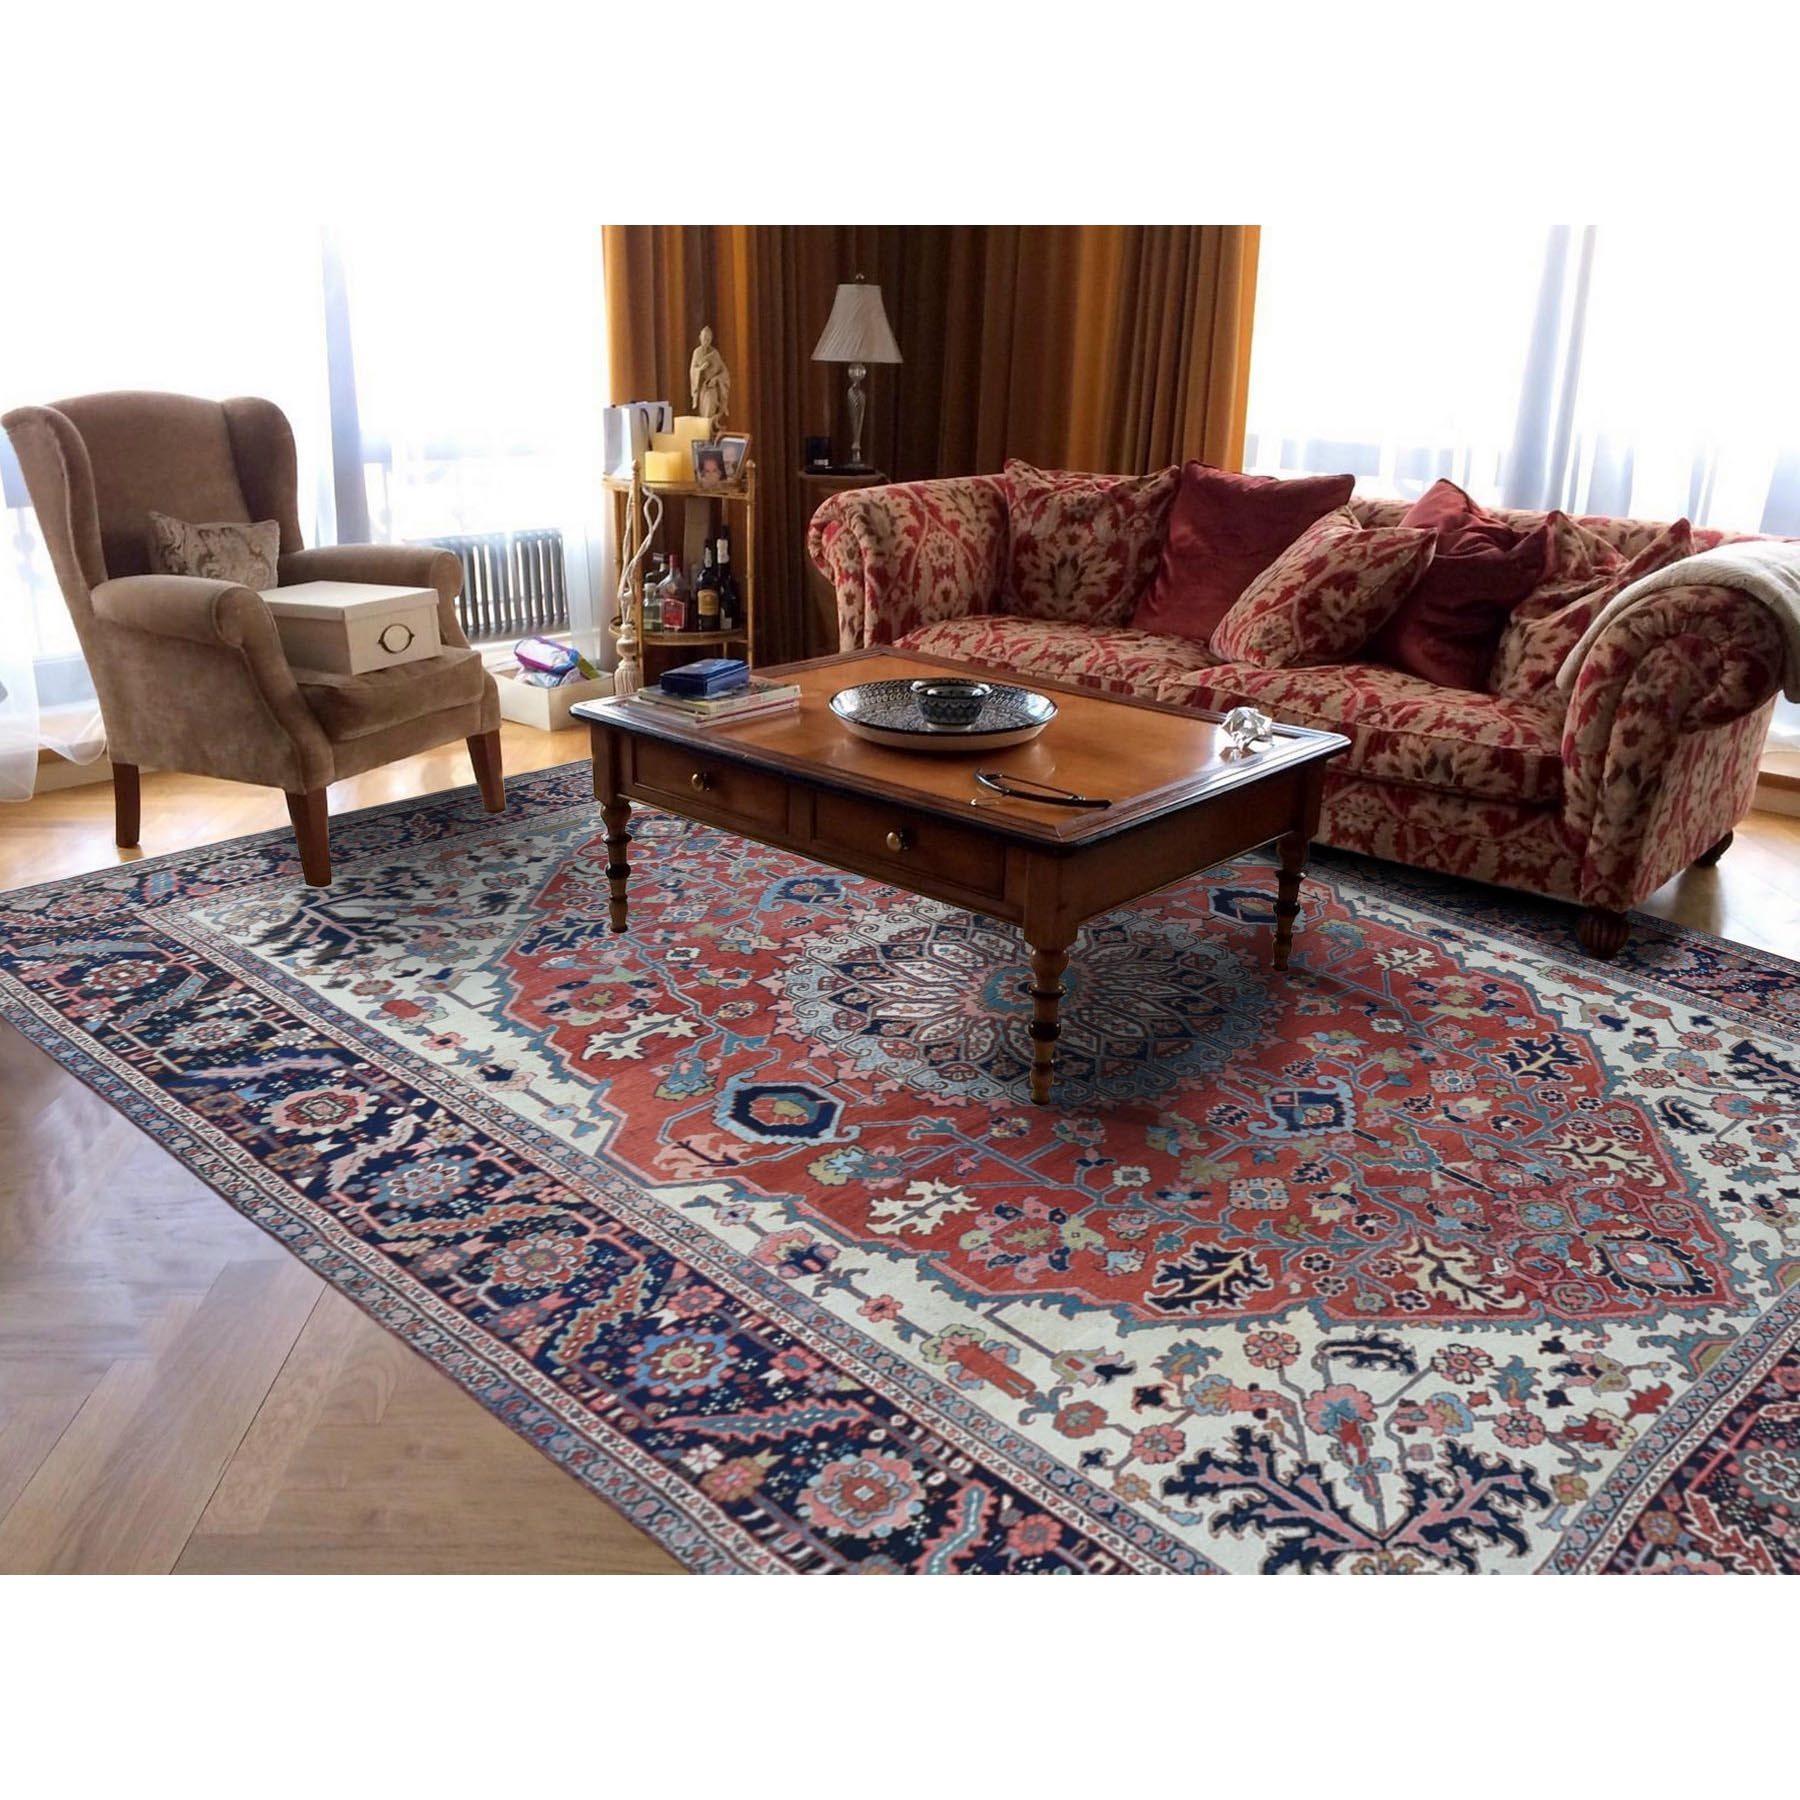 This fabulous Hand-Knotted carpet has been created and designed for extra strength and durability. This rug has been handcrafted for weeks in the traditional method that is used to makeExact Rug Size in Feet and Inches : 9'7